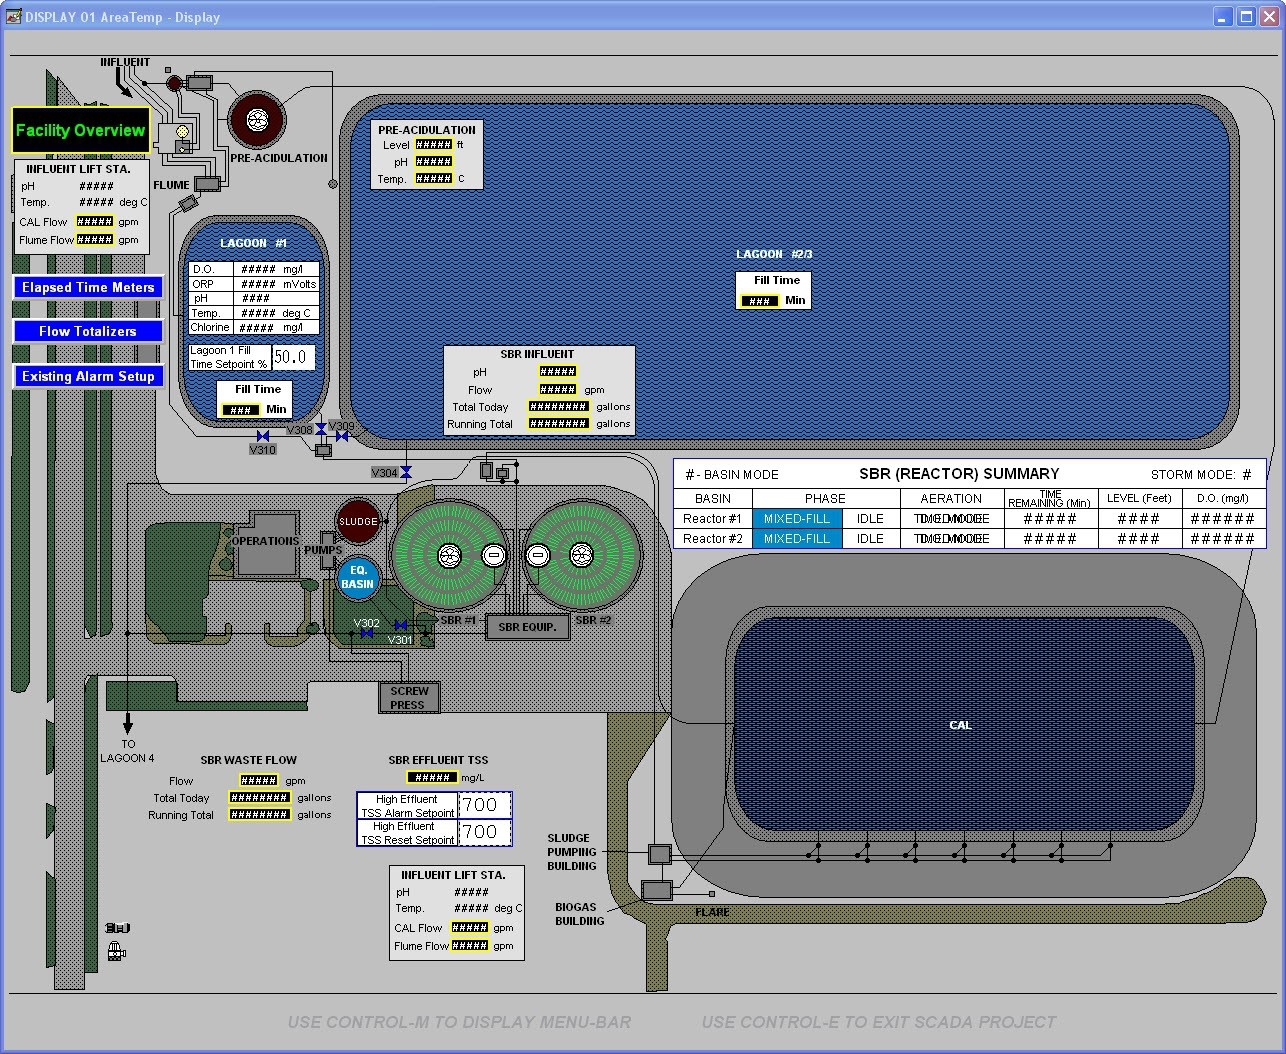 SUPERVISORY CONTROL AND DATA ACQUISITION SYSTEM